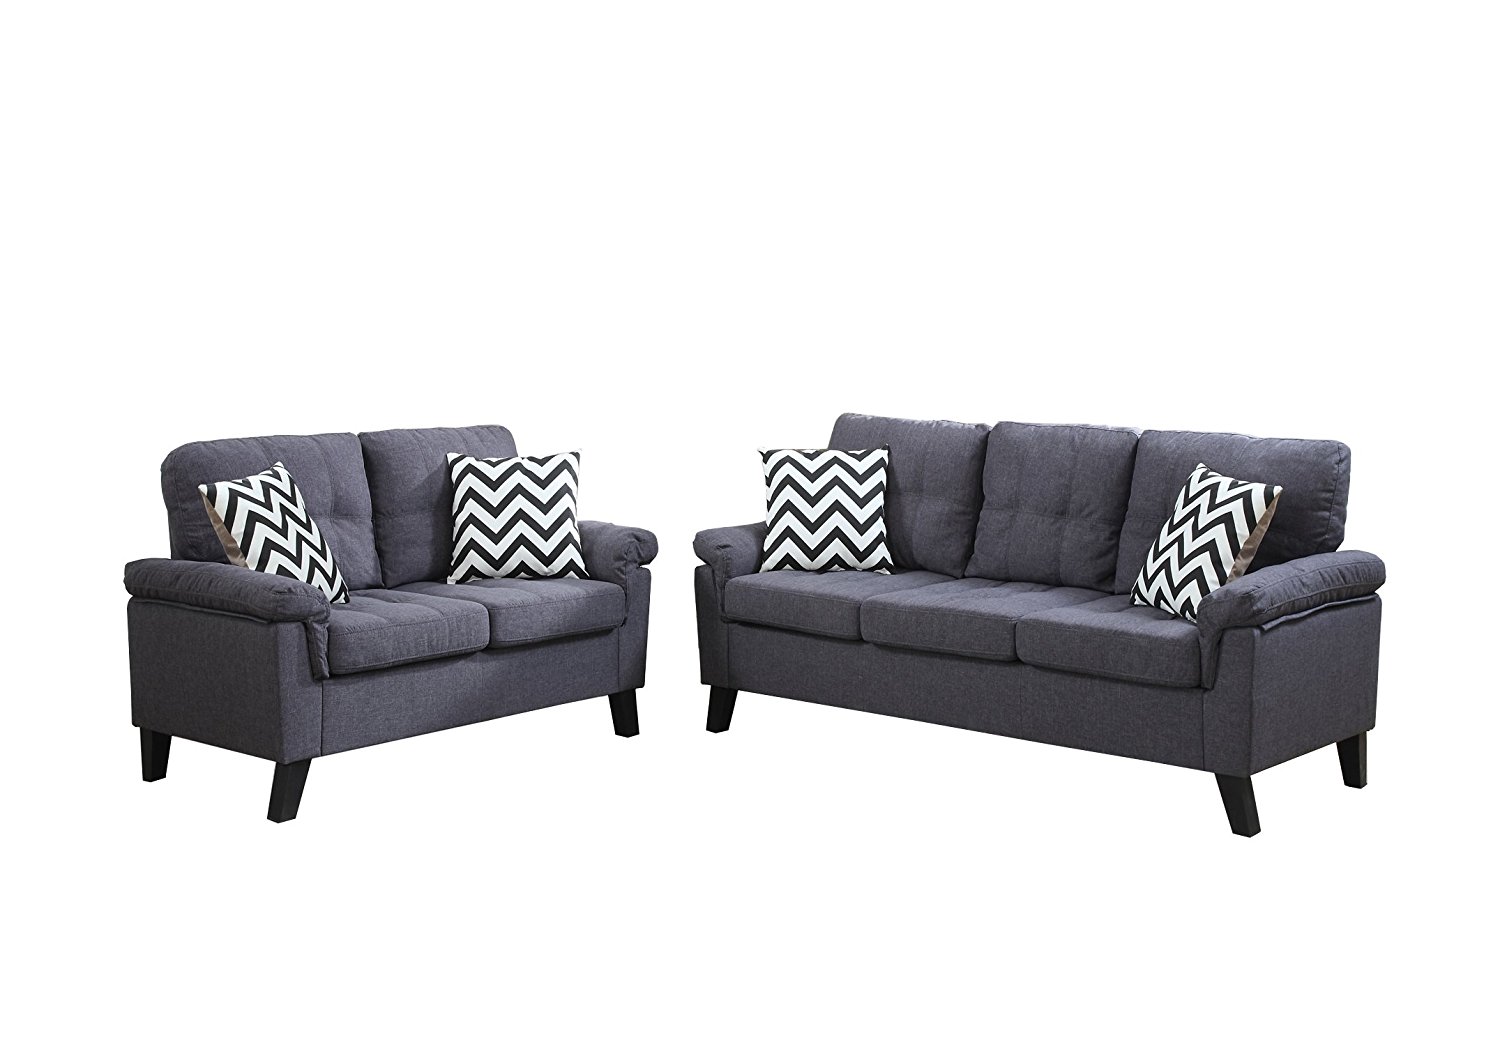 Affordable and Stylish Grey Sofa and Sectional Options (Something for Everyone!)